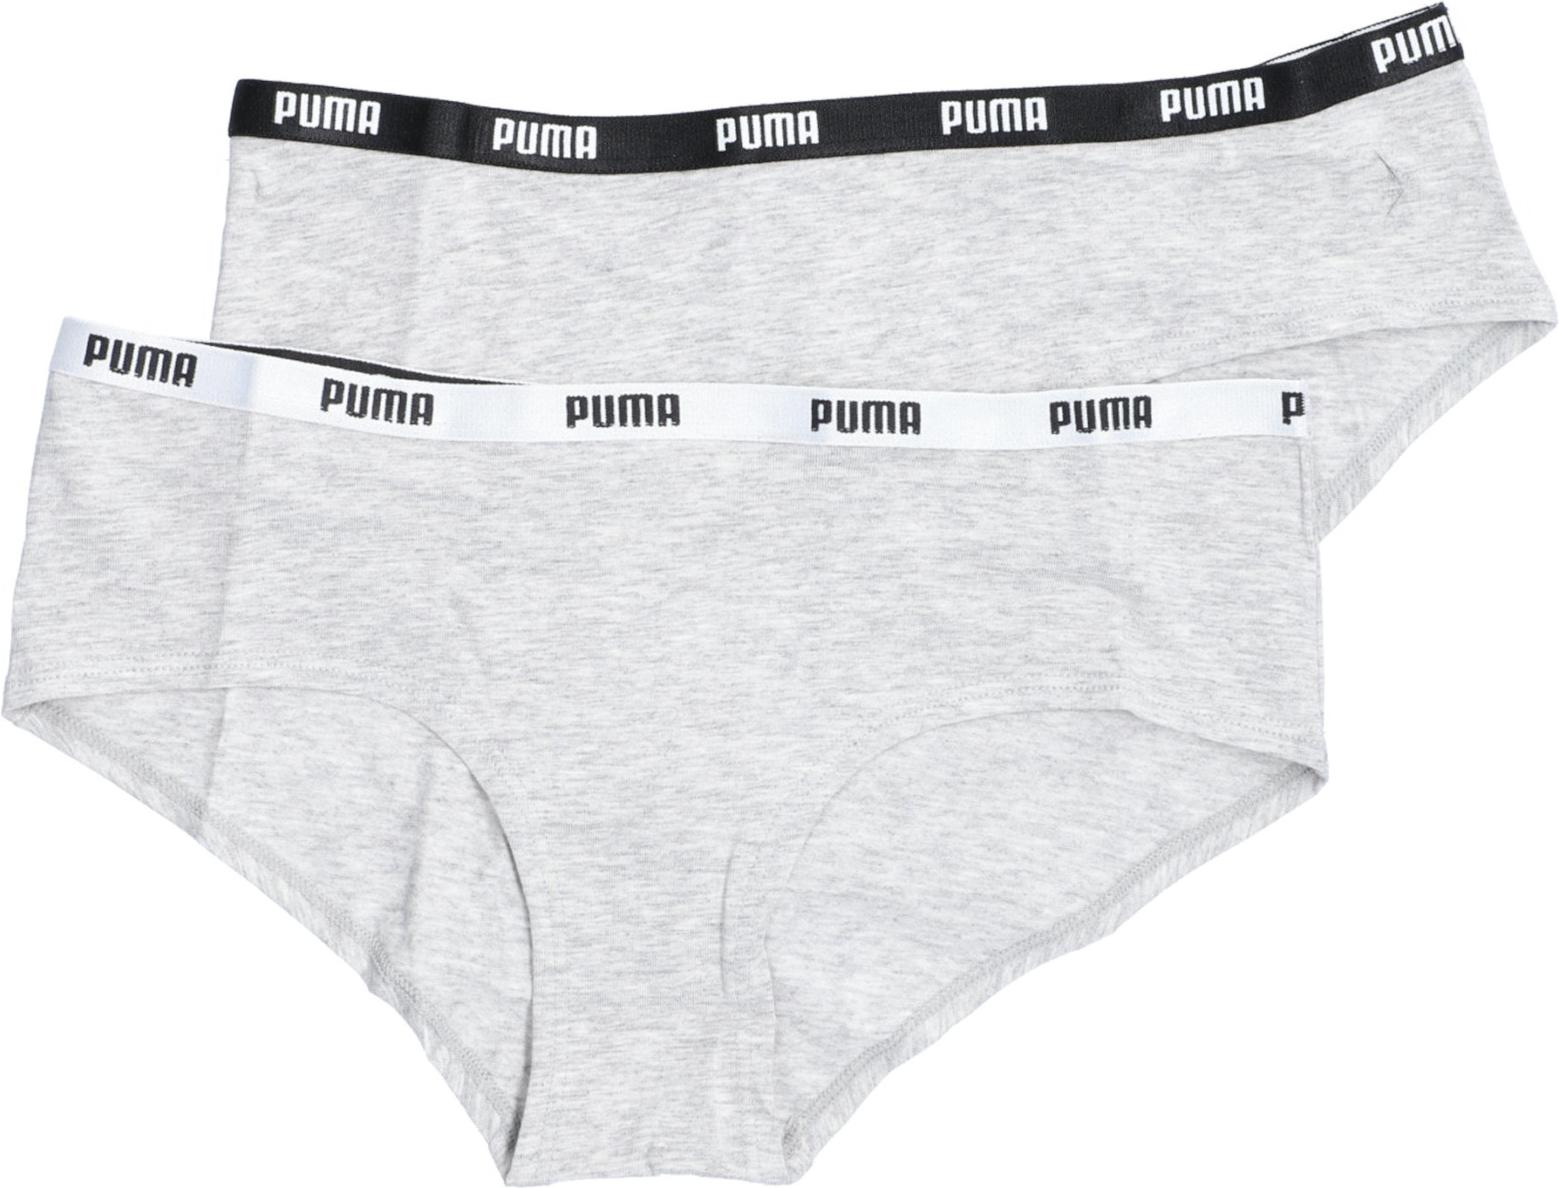 Mutande Puma Iconic Hipster 2 PACK